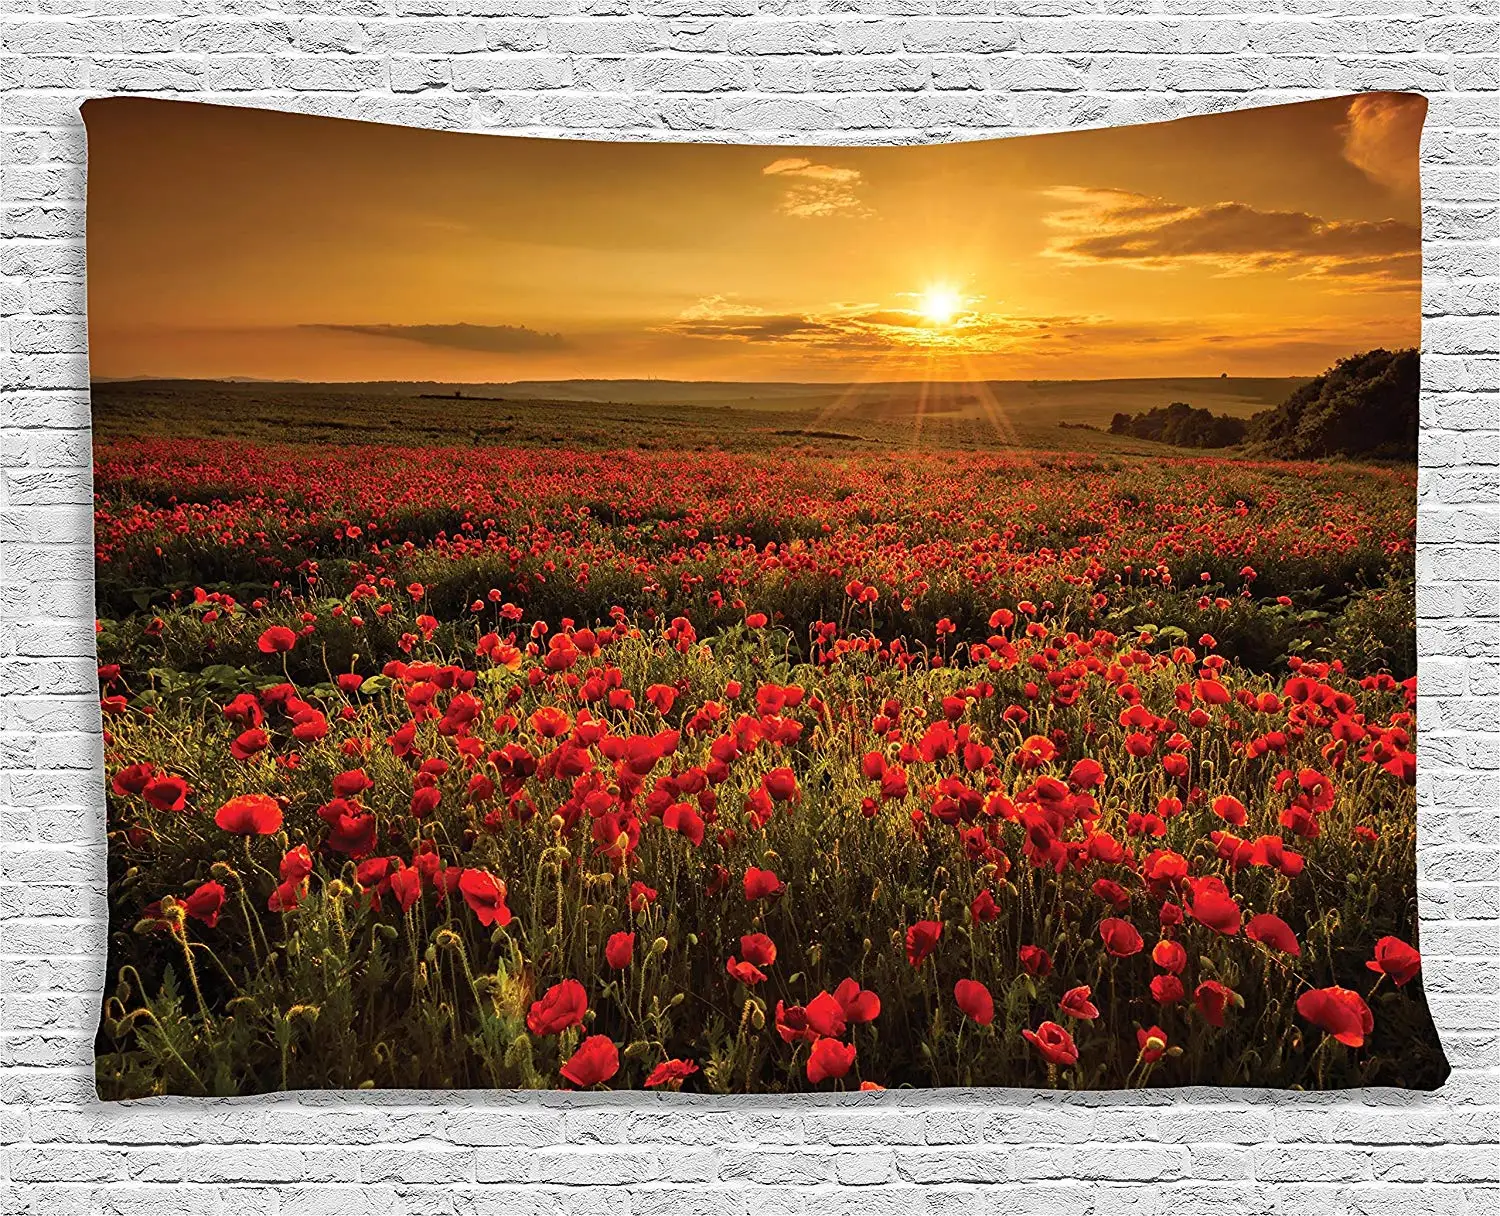 

Poppy Decor Tapestry Poppy Field at Sunset Sun Beams Meadow Cloudscape Wildflower Scene Wall Hanging Bedroom Living Room